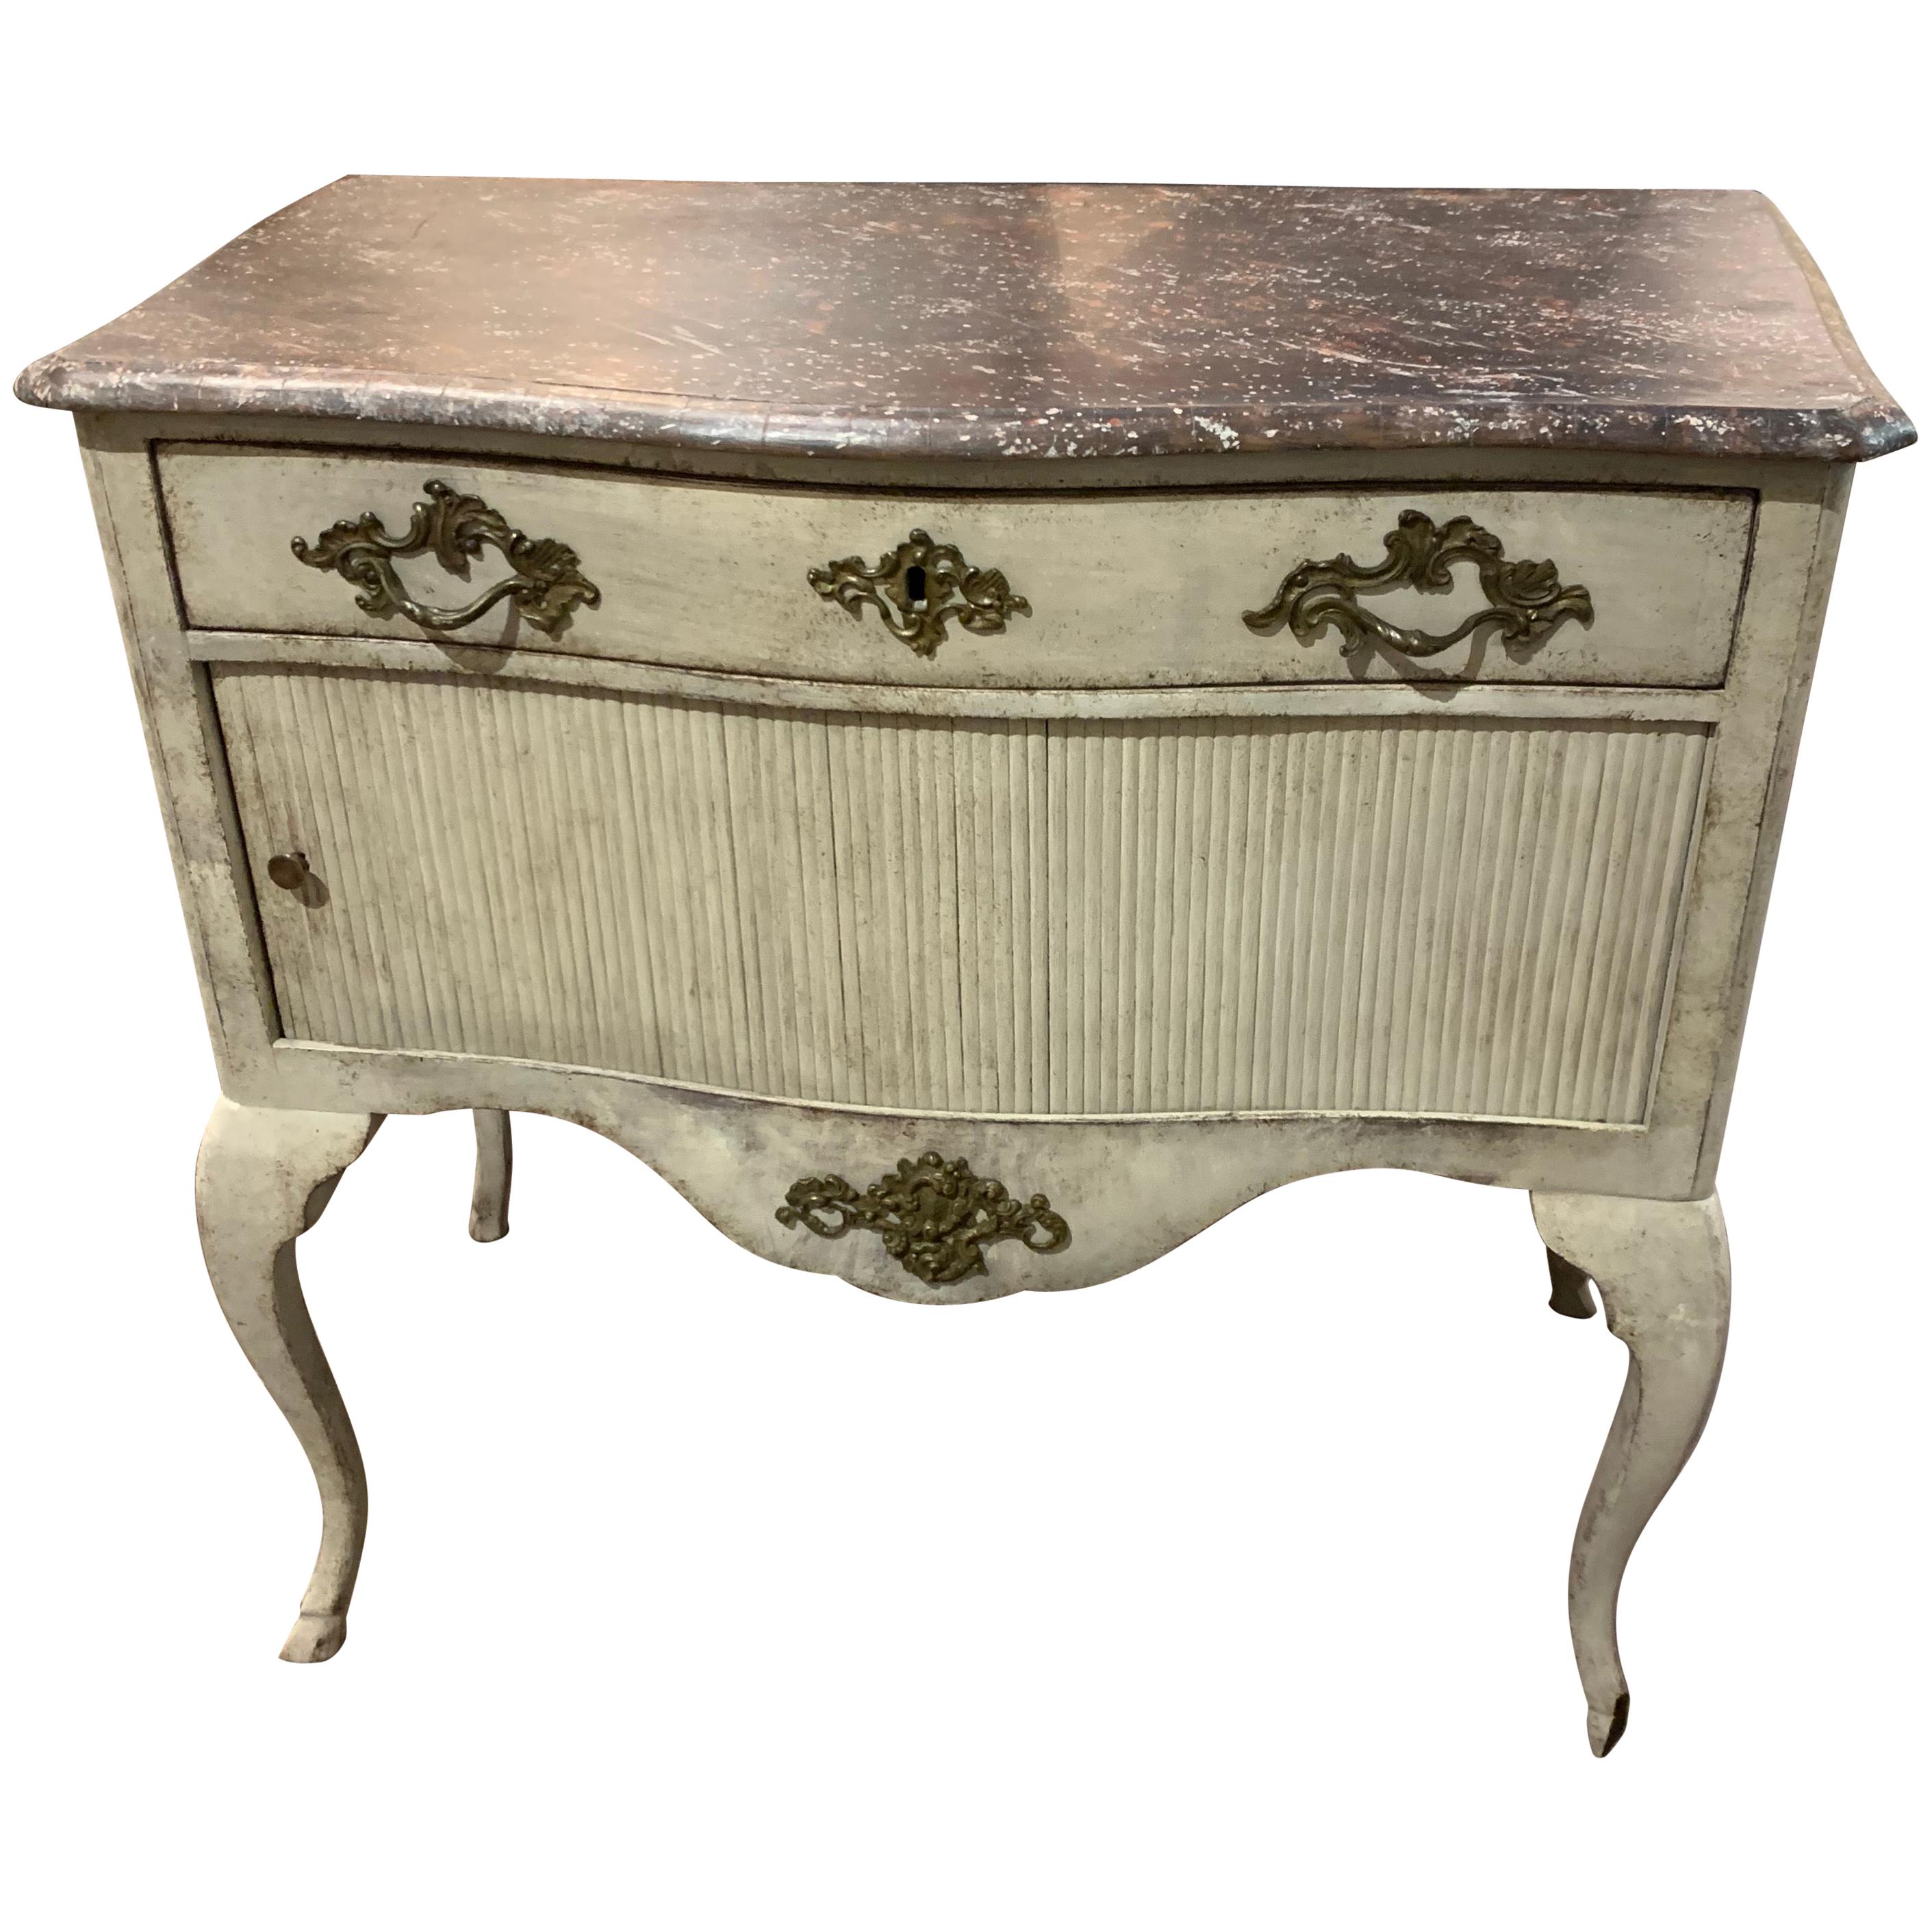 19th Century Swedish Carved and Painted Side Table